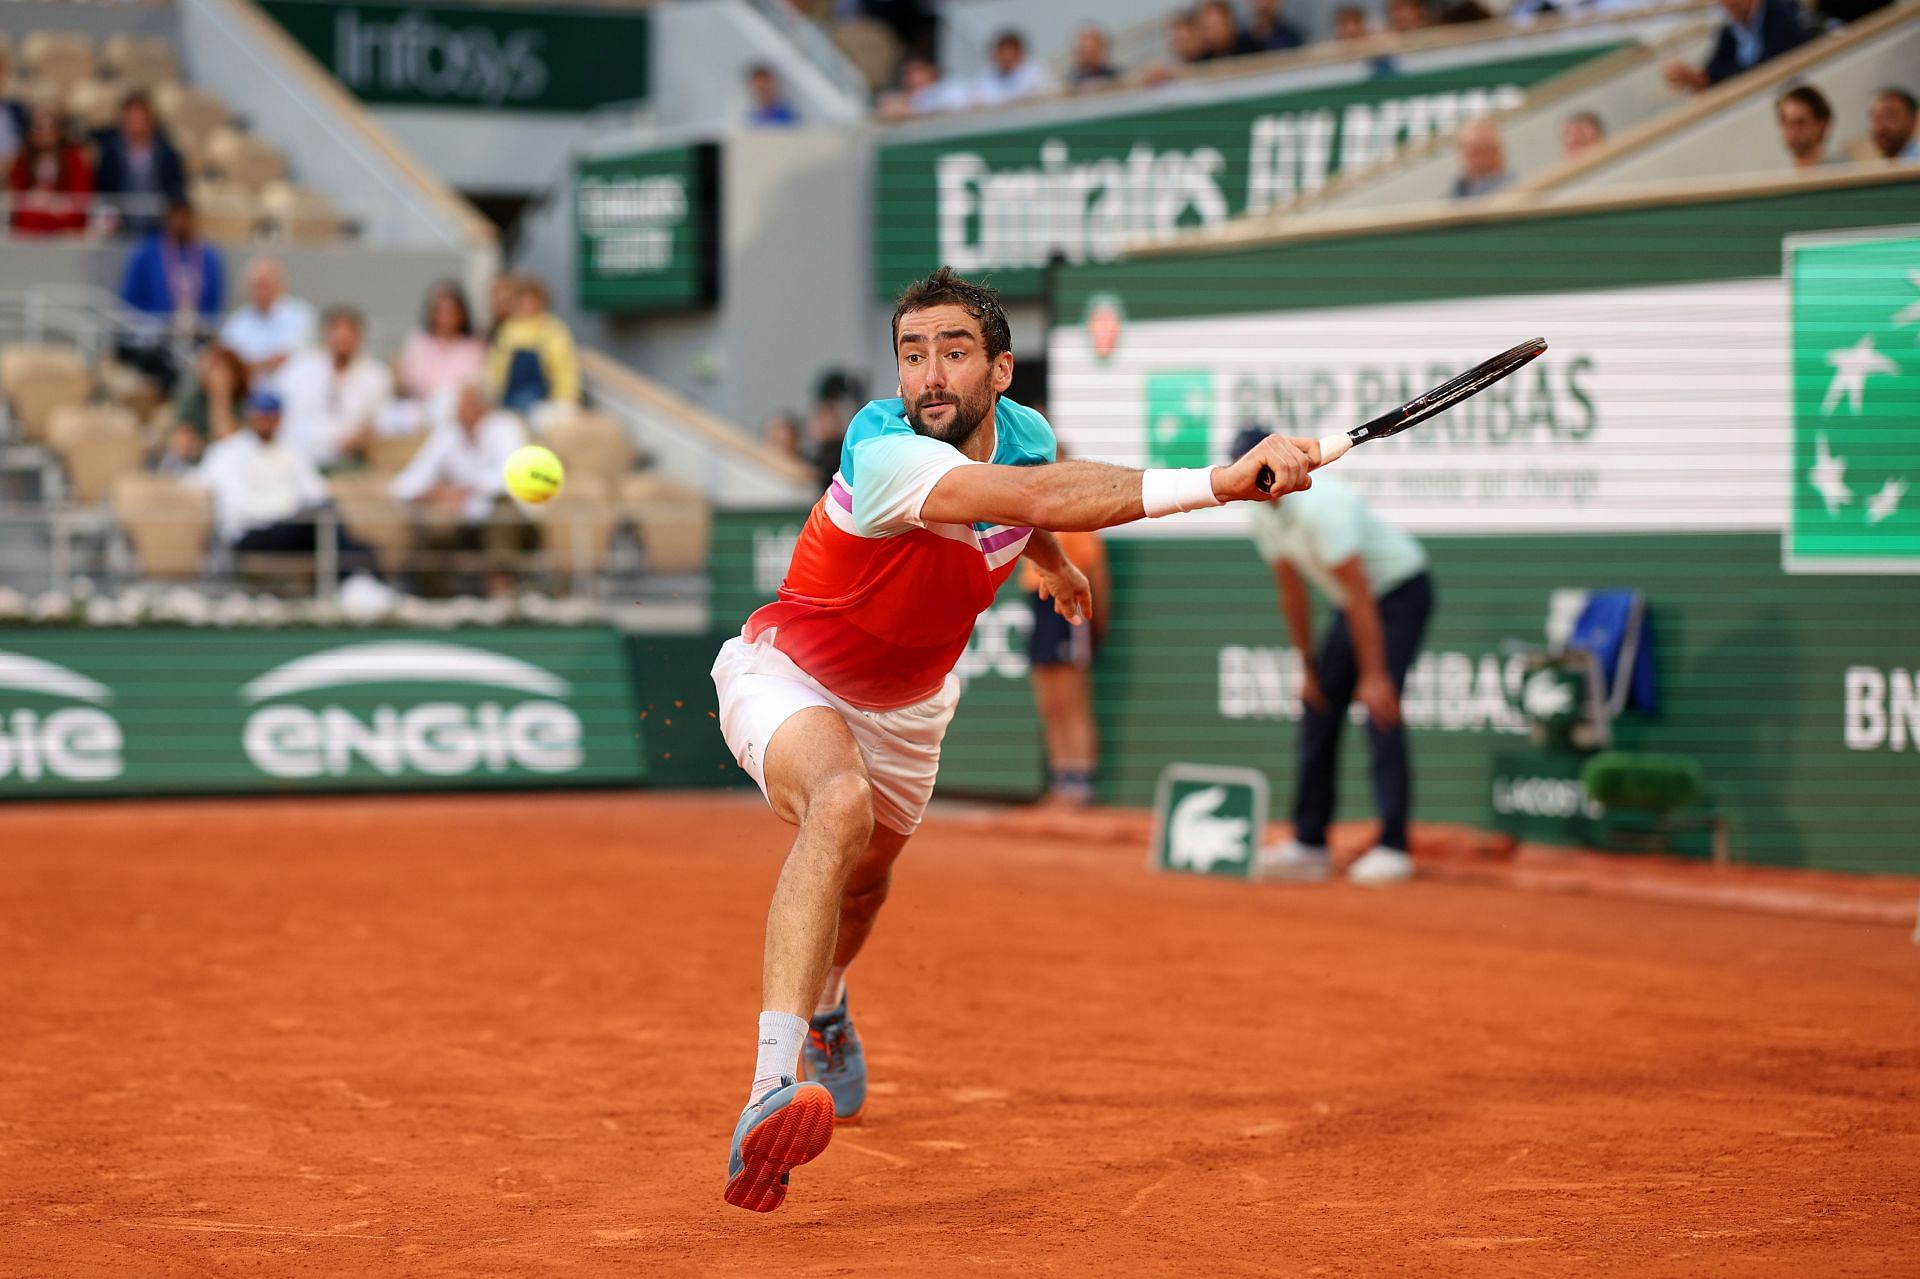 Marin Cilic made the semifinal in his last appearance.